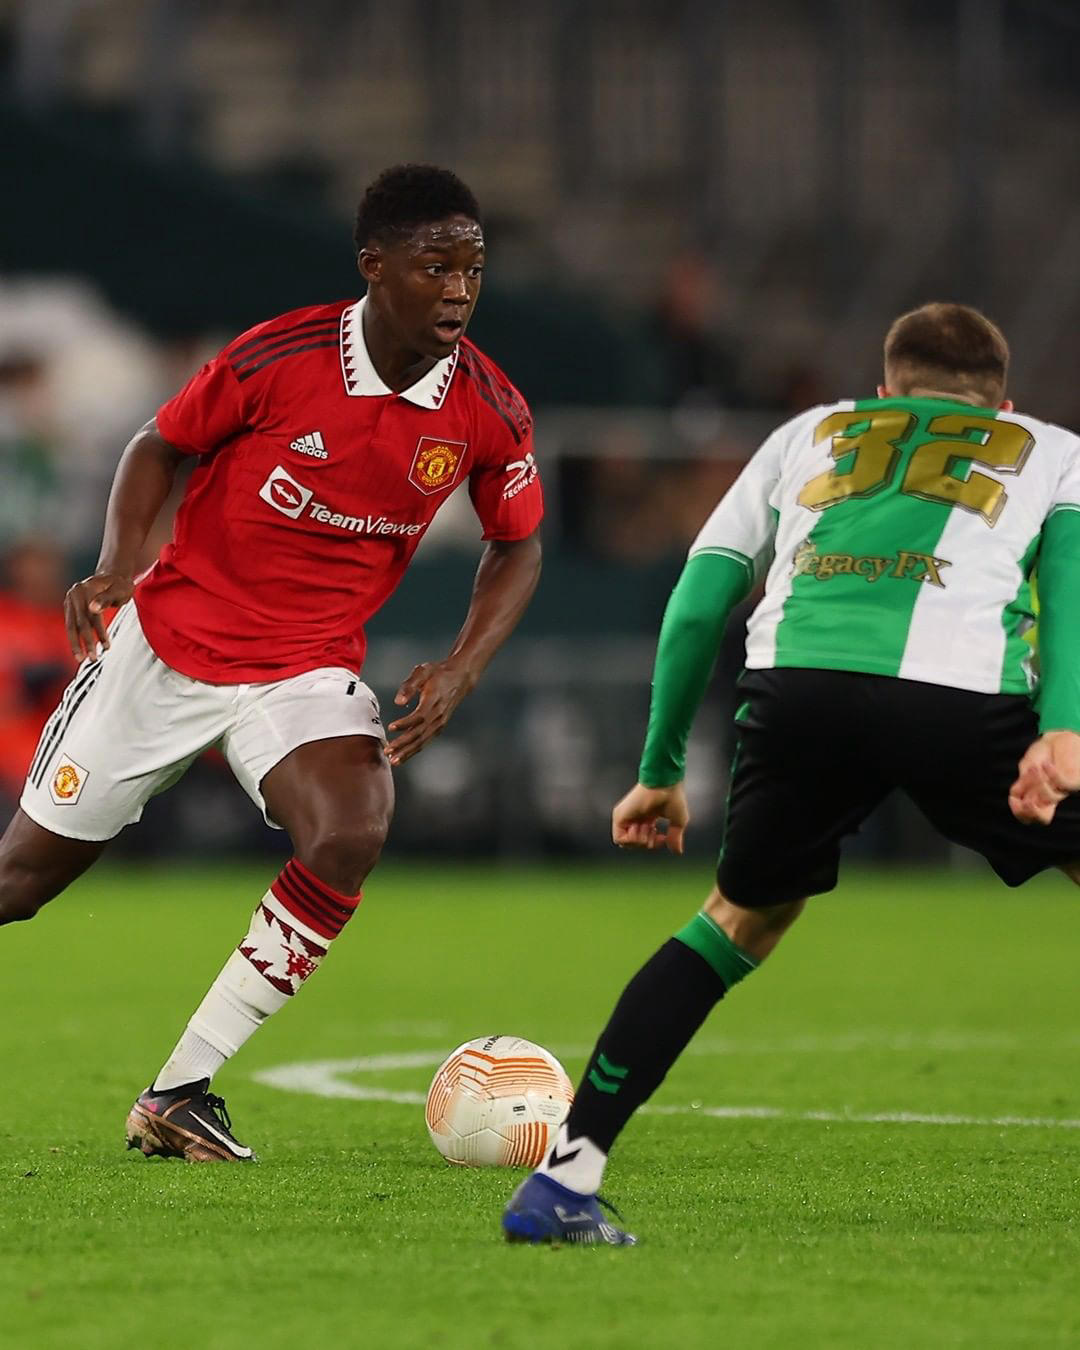 Manchester United - Valuable experience earned for several #MUAcademy players in Seville